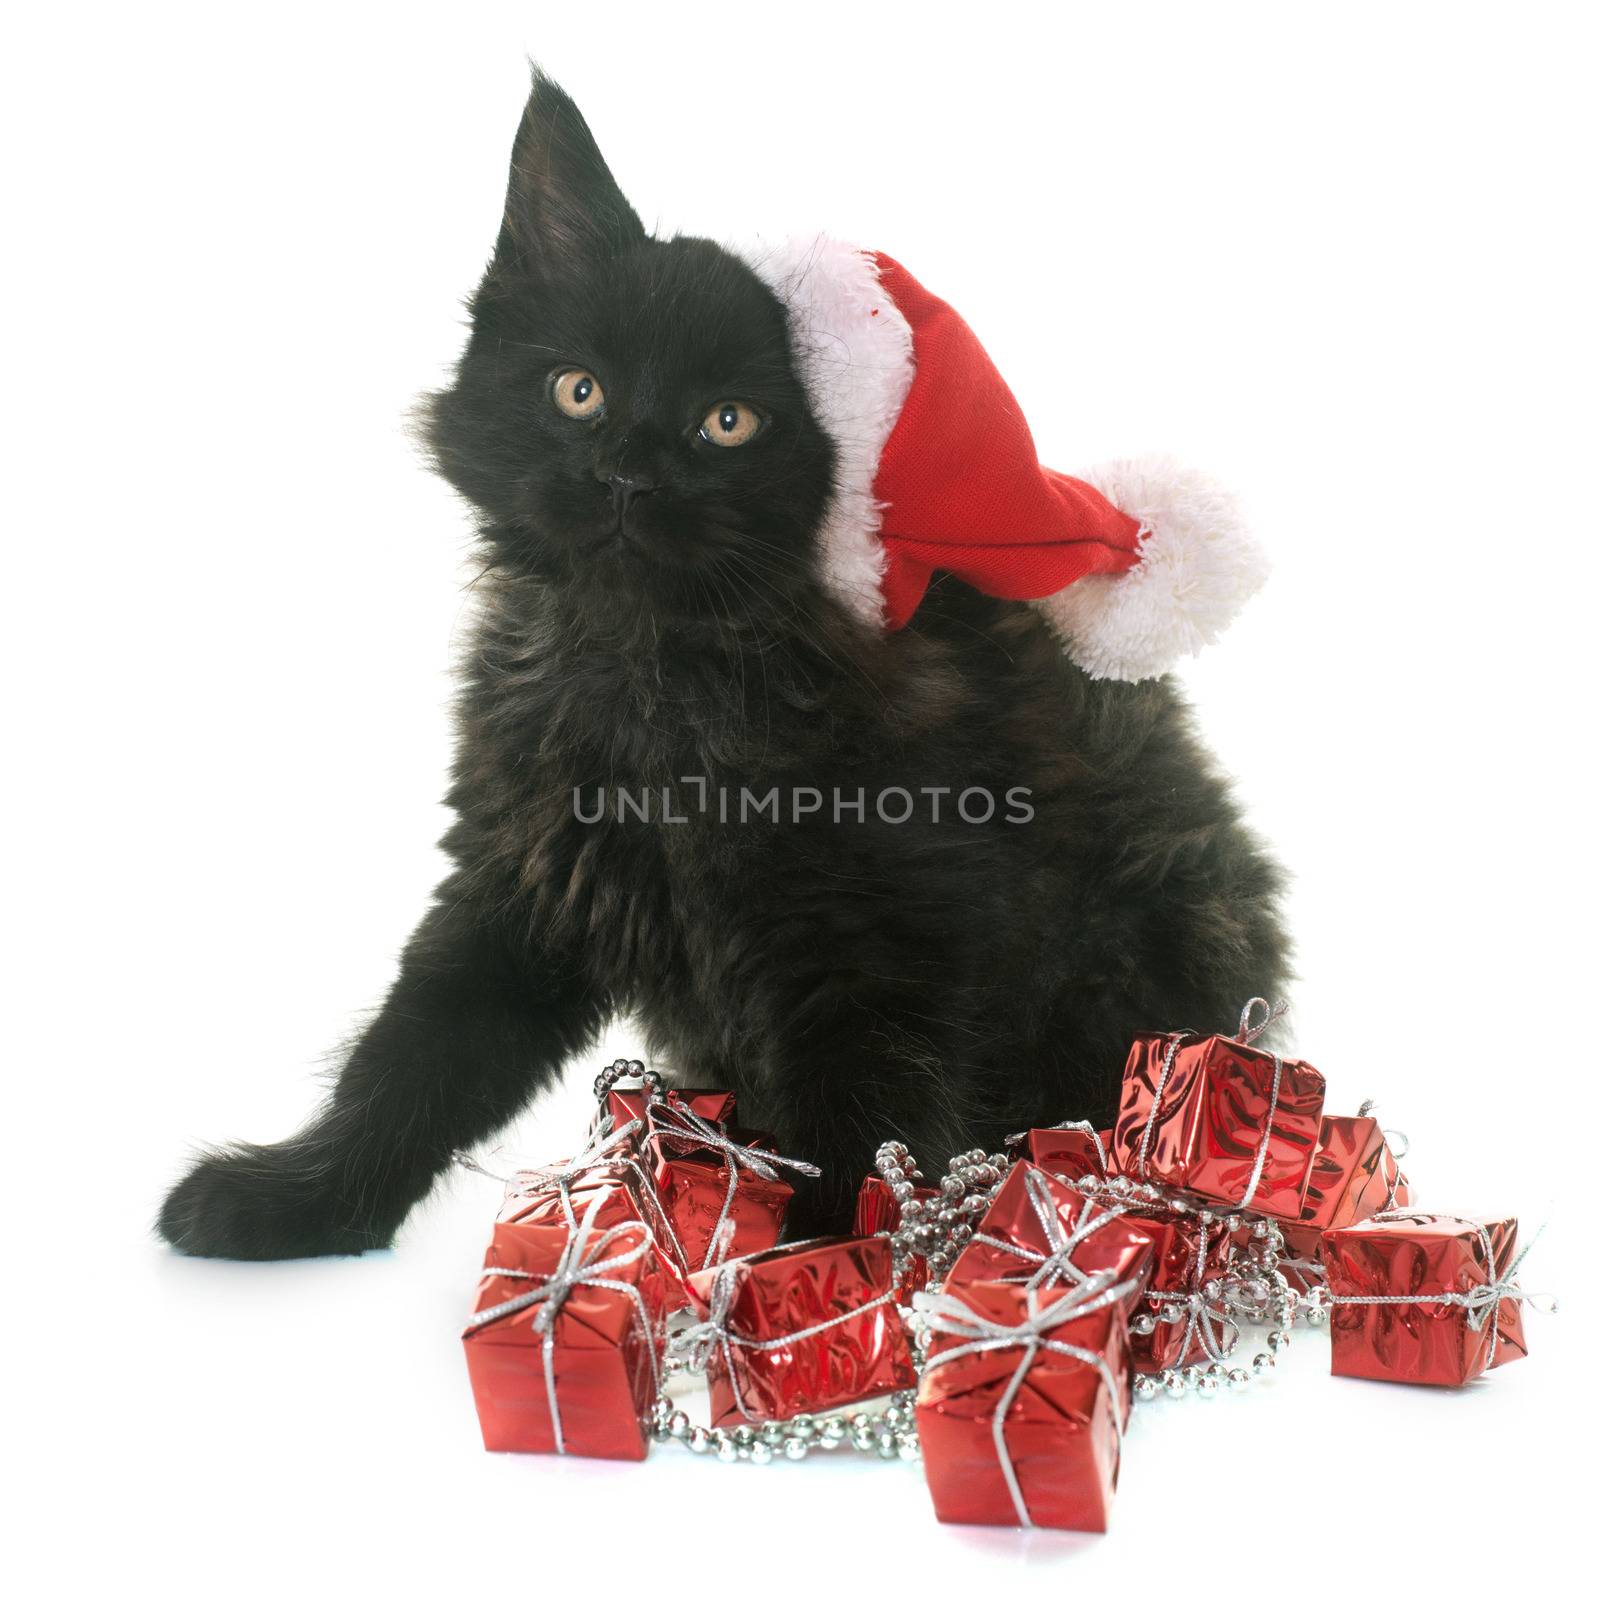 maine coon kitten in front of white background